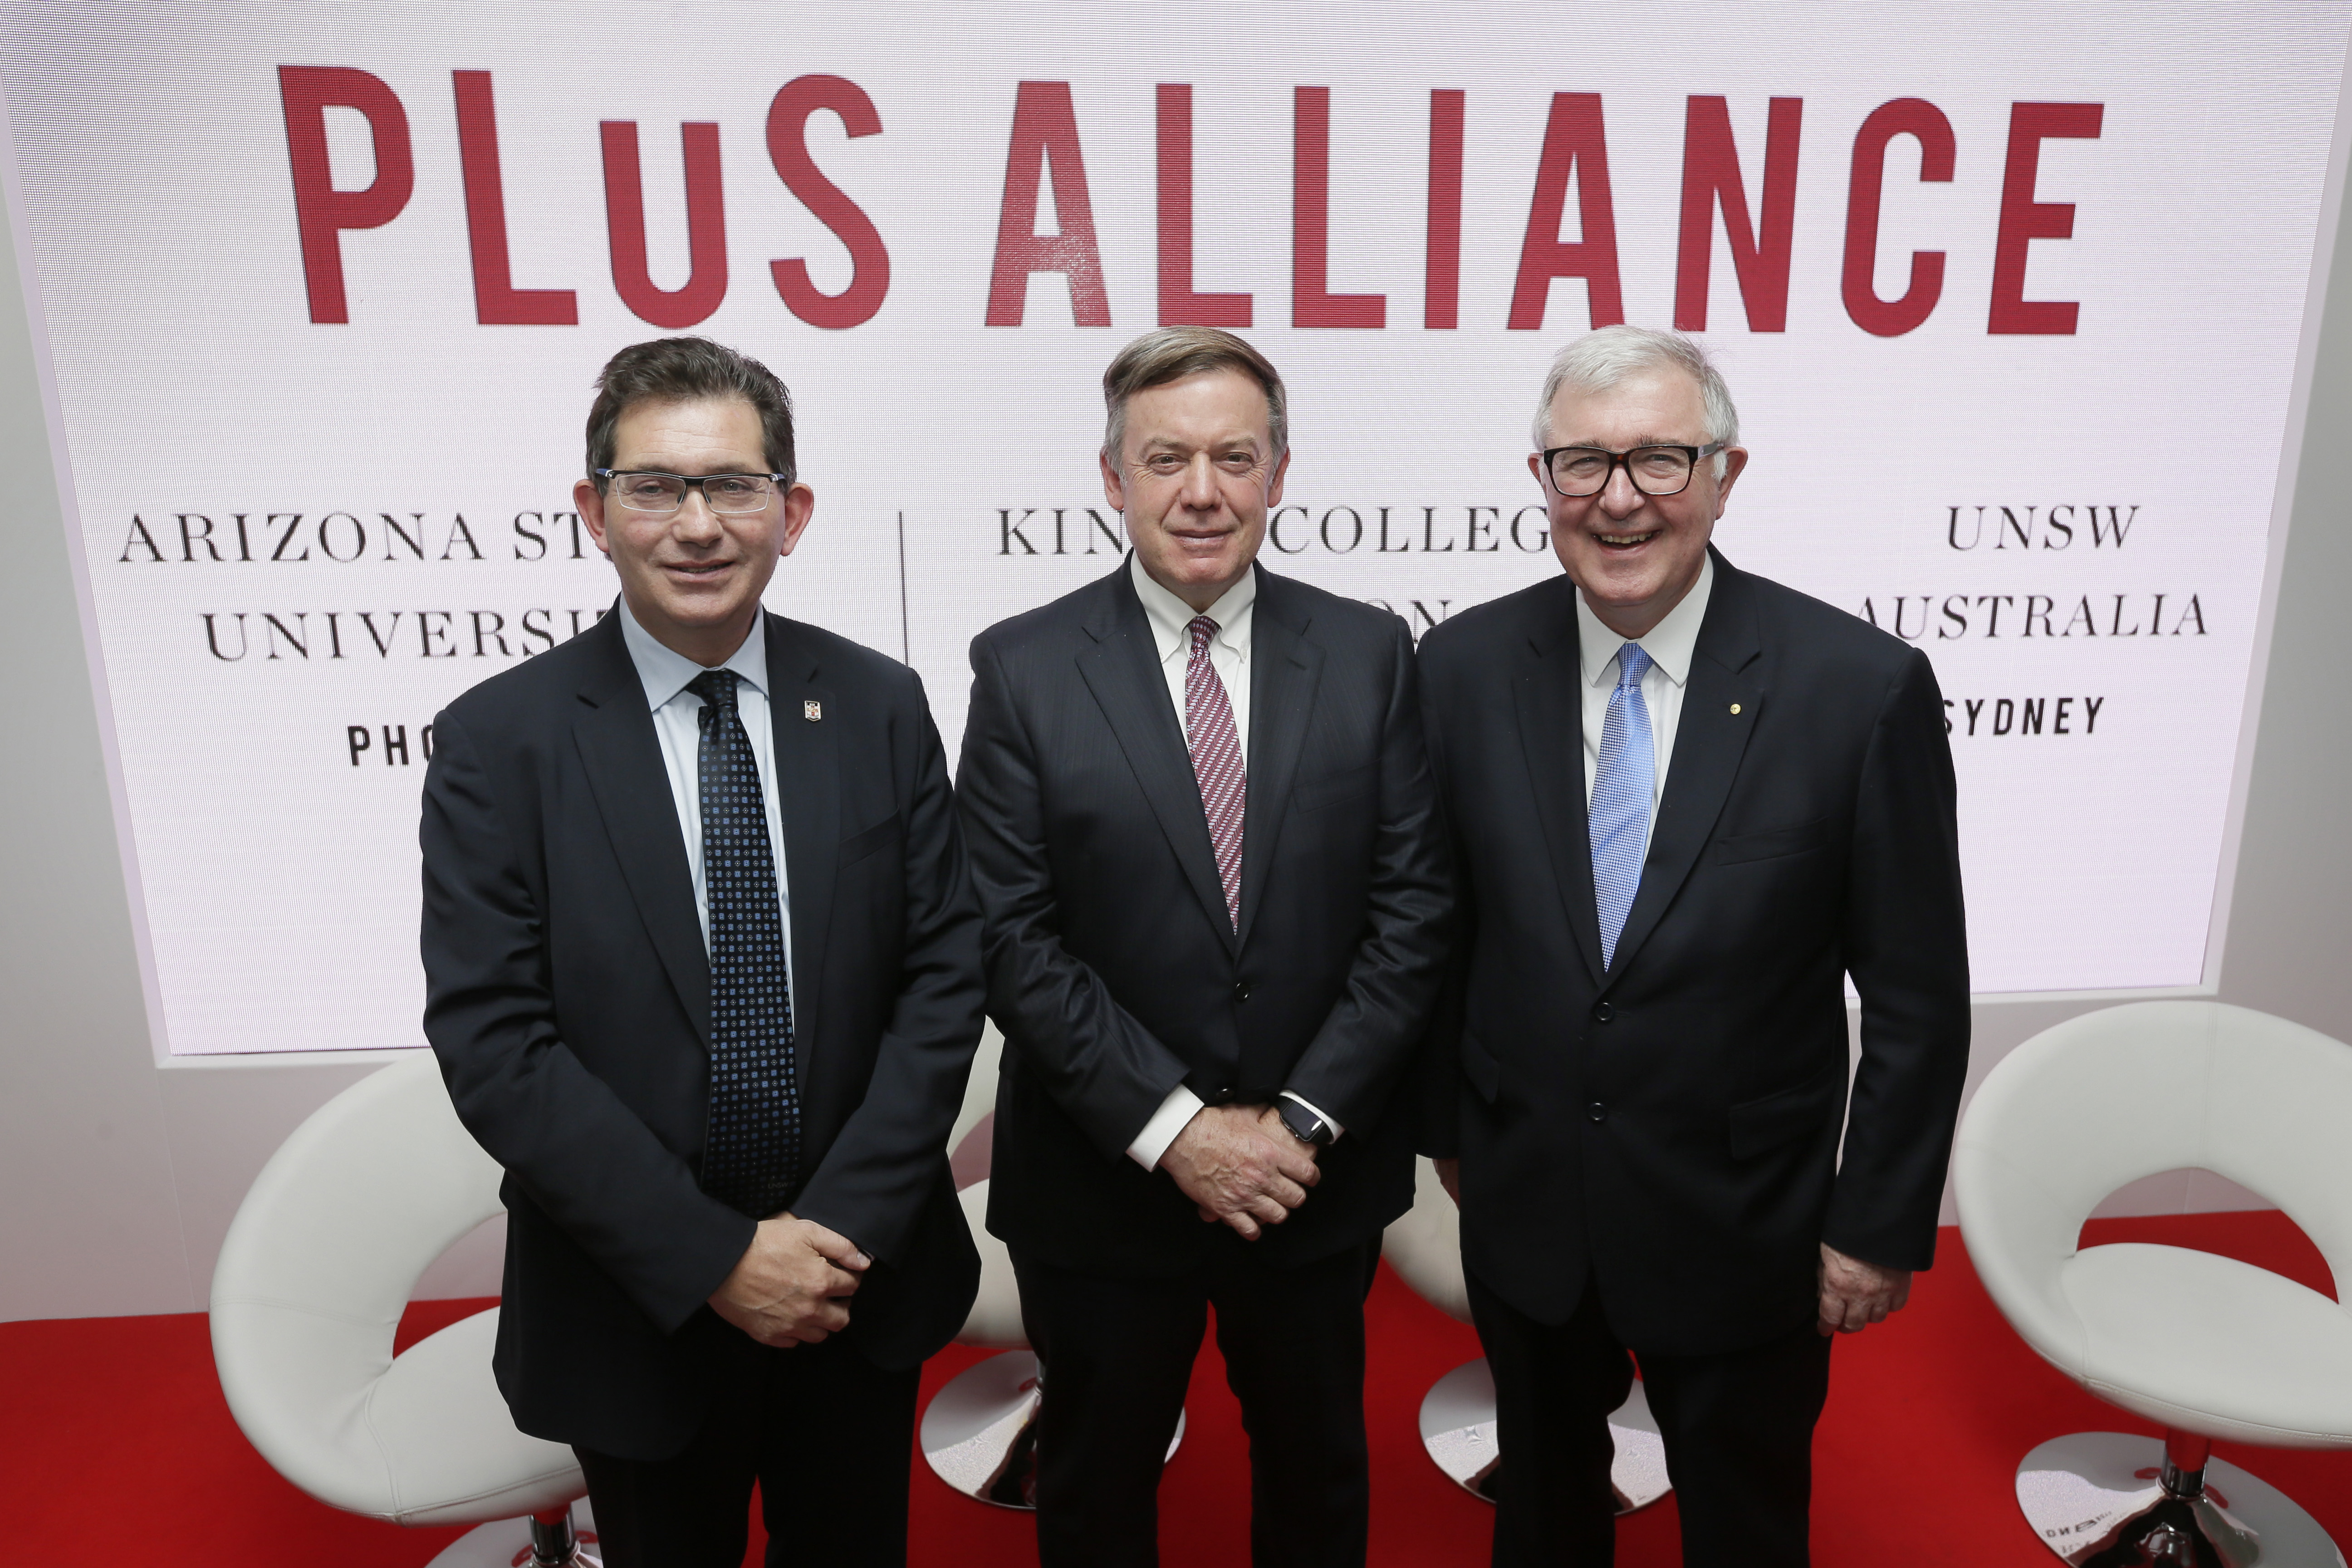 A photograph of (from left) Ian Jacobs of UNSW Australia, ASU President Michael Crow and Edward Byrne of King's College London, and 